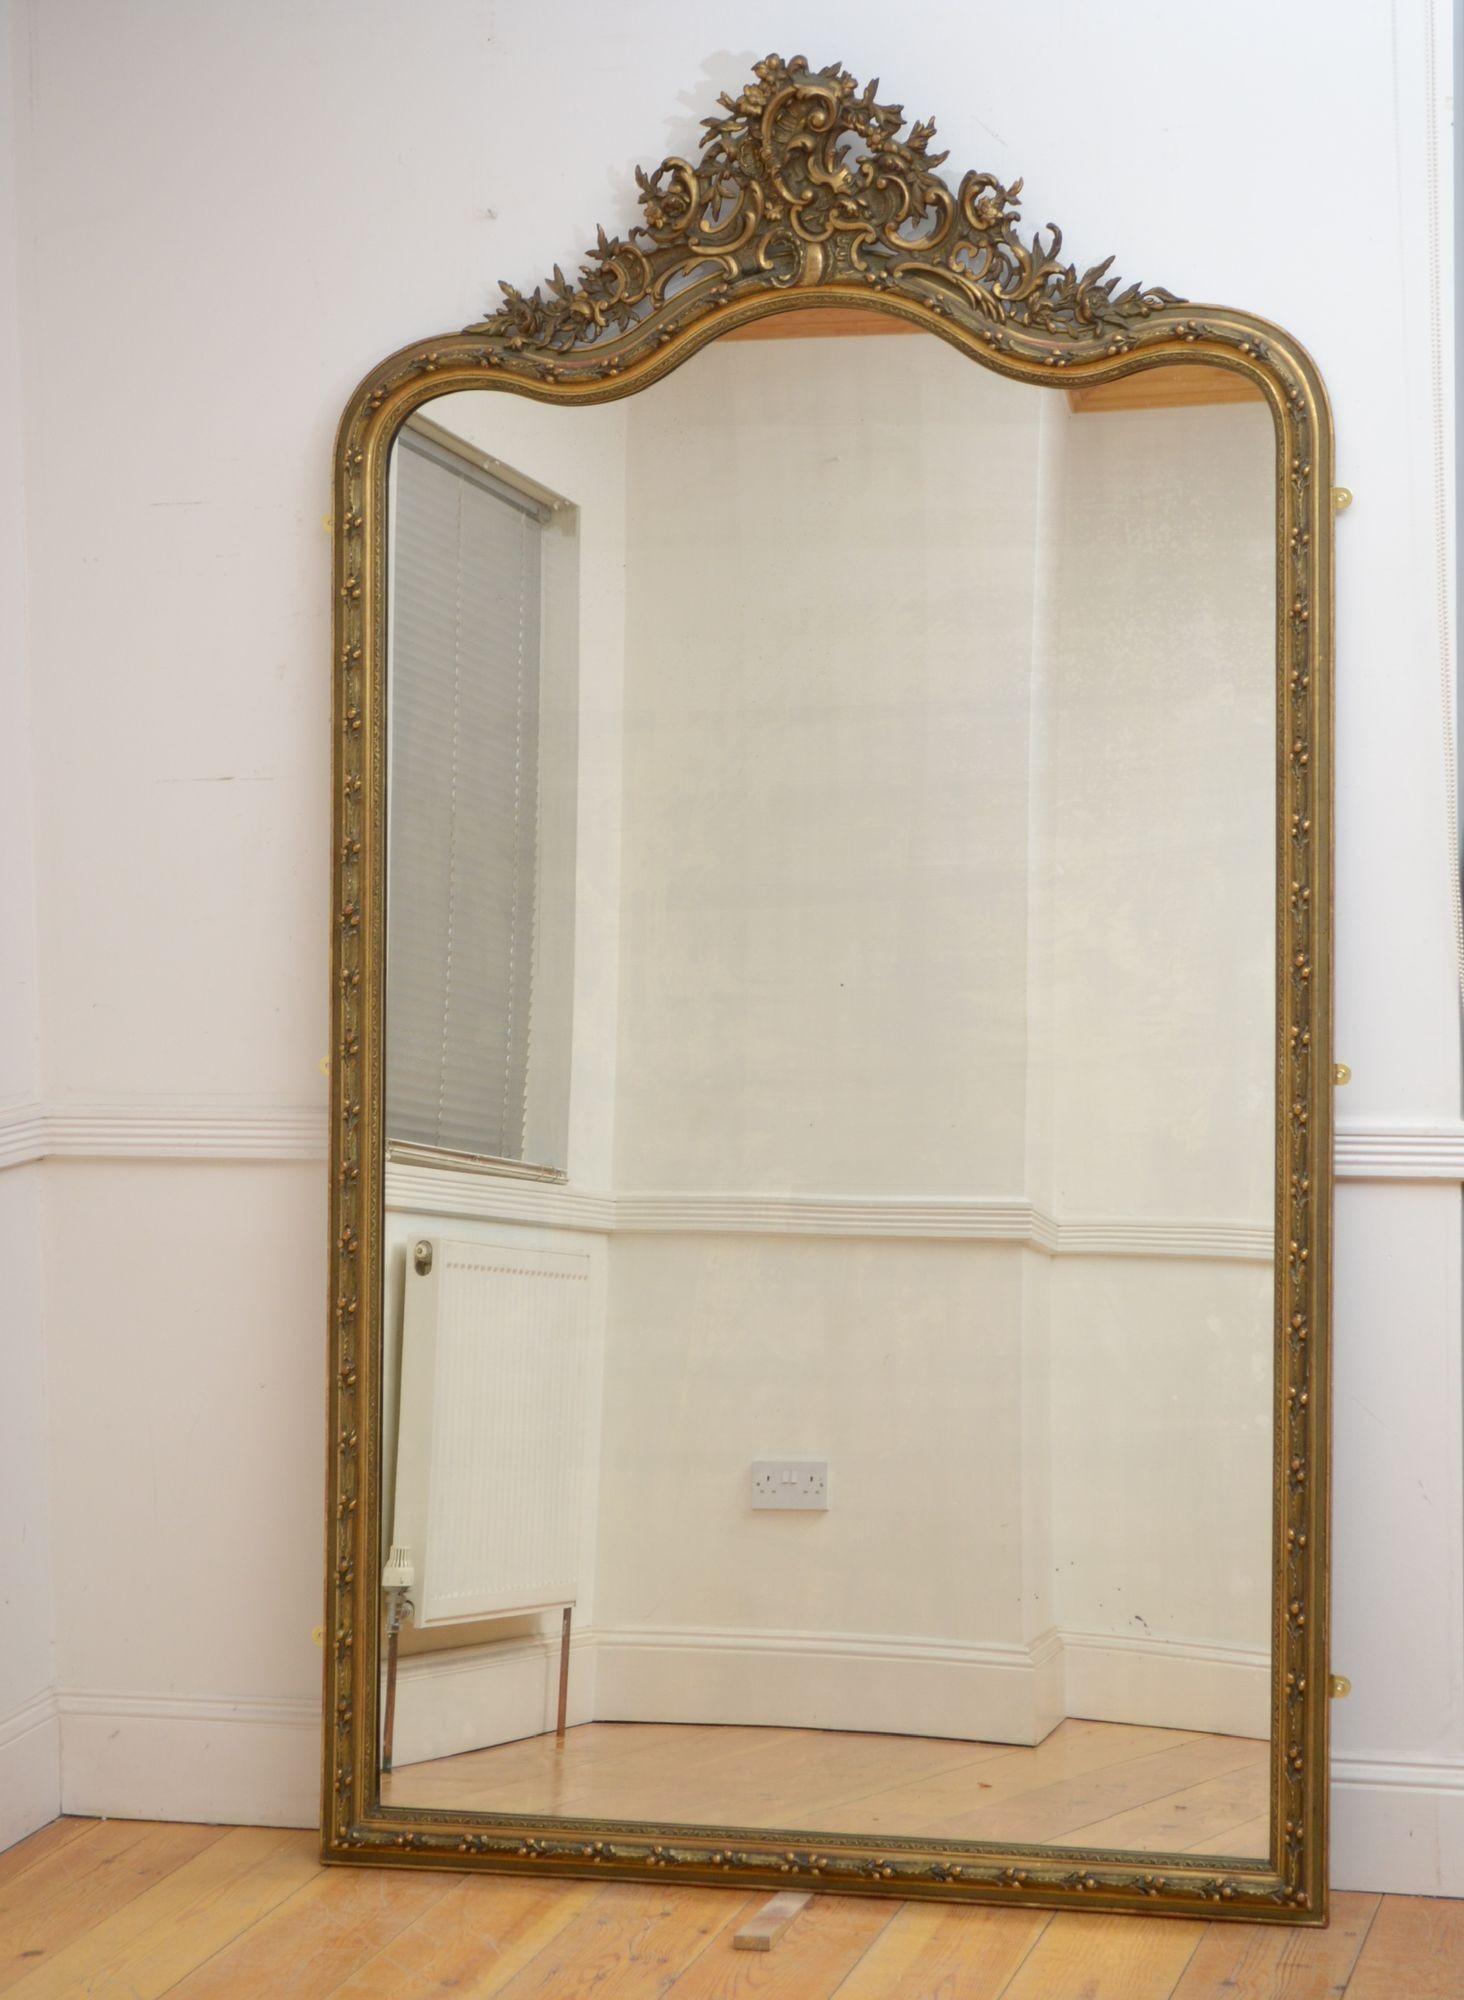 Sn5397 Superb XIXth century French gilded leaner or wall mirror, having original glass with minor imperfections, in moulded and gilded frame decorated with holly leaf and berries throughout and extensive crest with flowers, leaves and scrolls. This